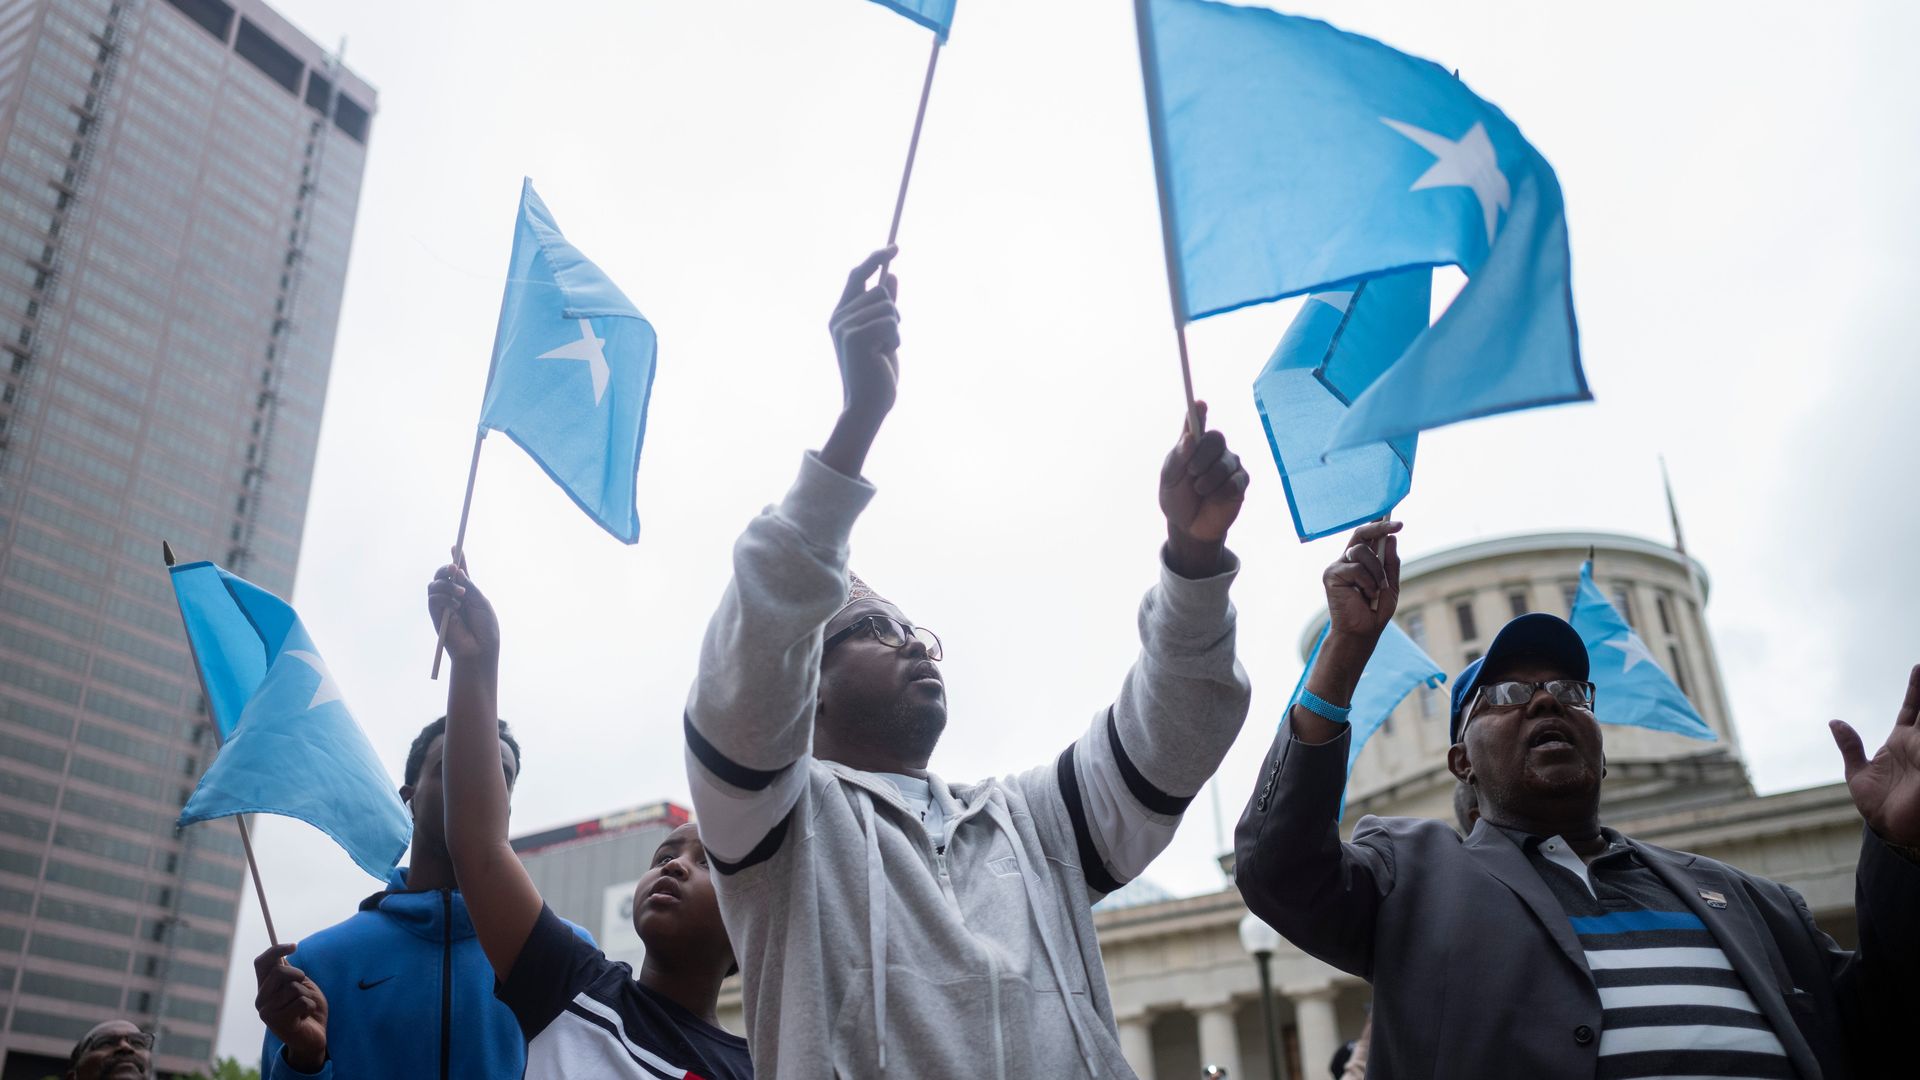 Somalians wave flags in front of the Ohio Statehouse.